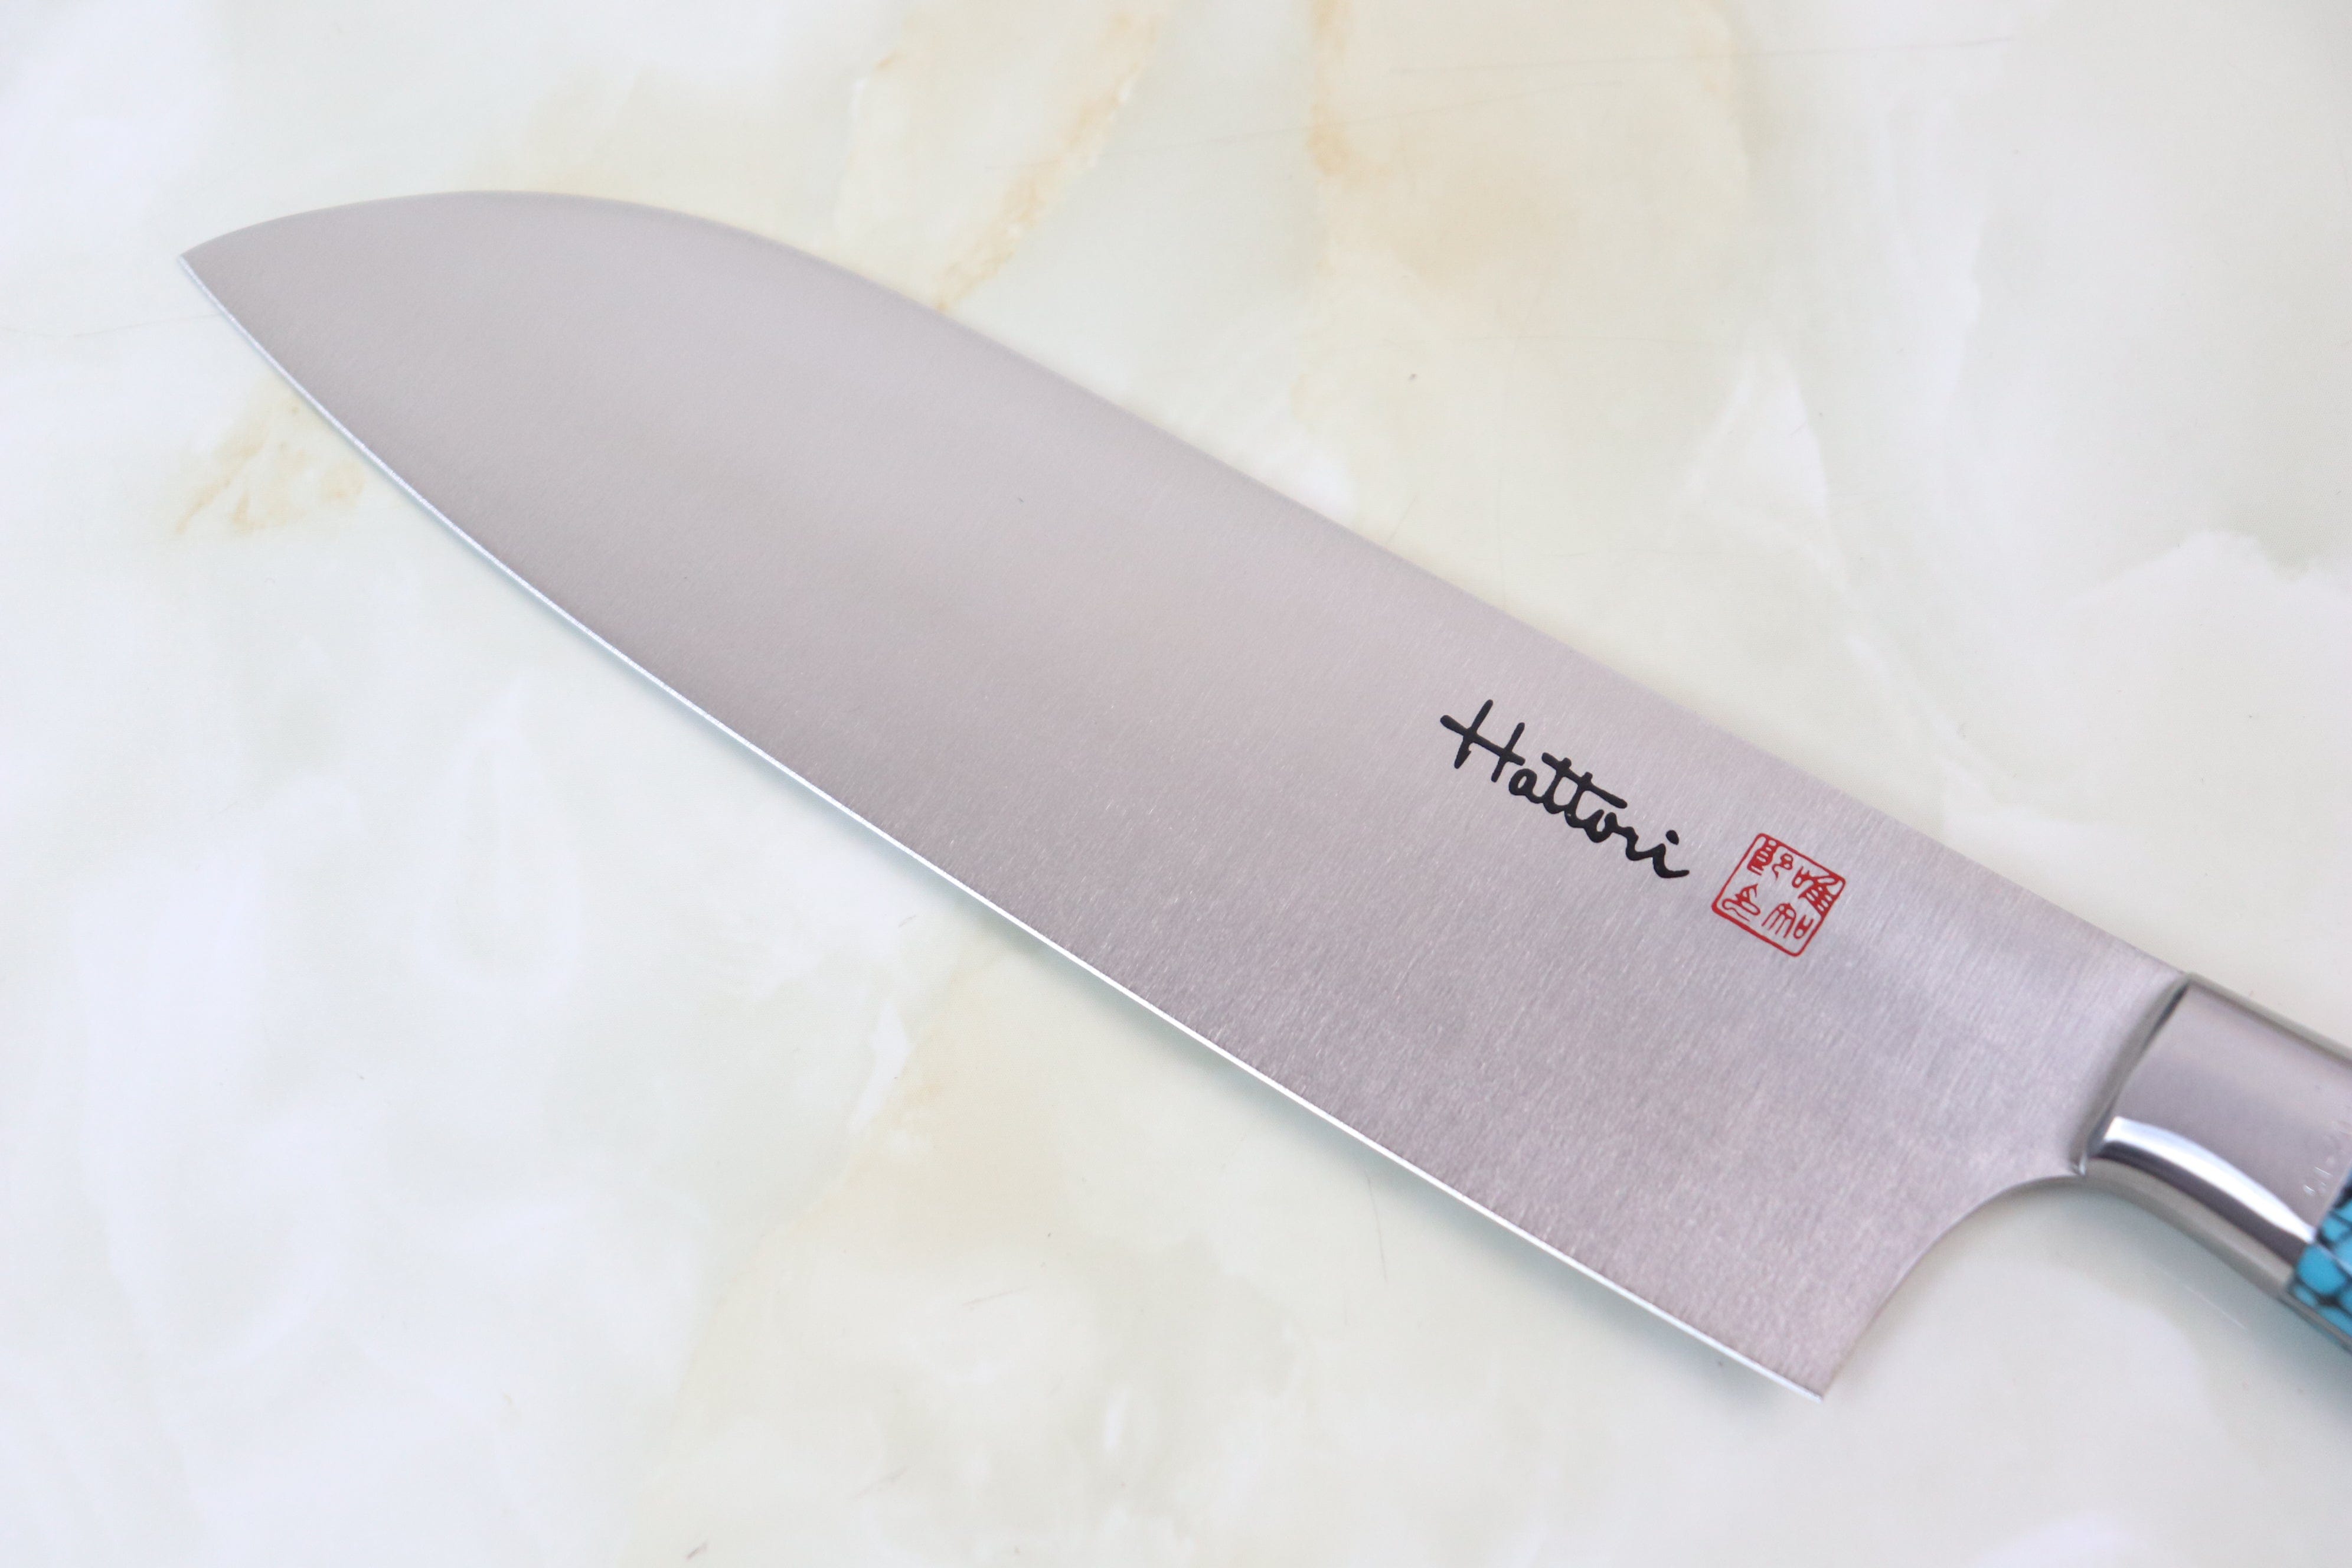 Hattori Forums Custom Limited Edition Year 2022, FH Series FH-4SP2022T  Santoku 170mm (6.6 Inch, Turquoise Gem-Composite-stone Handle)